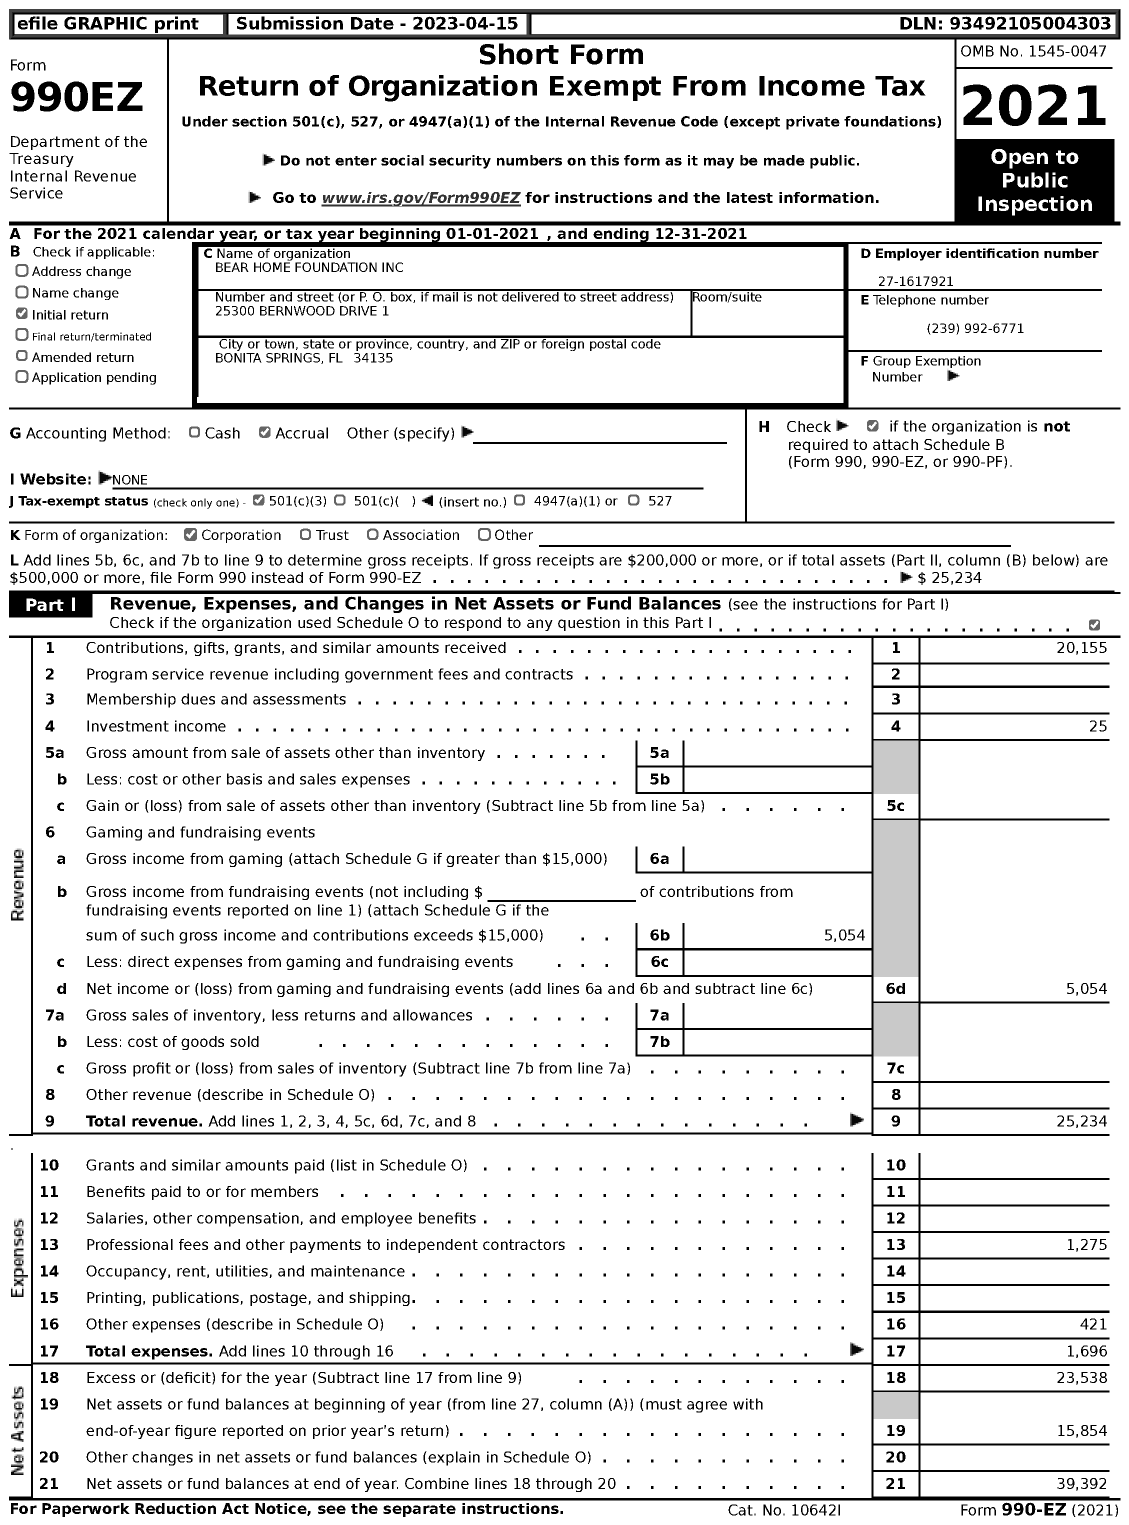 Image of first page of 2021 Form 990EZ for Bear Home Foundation